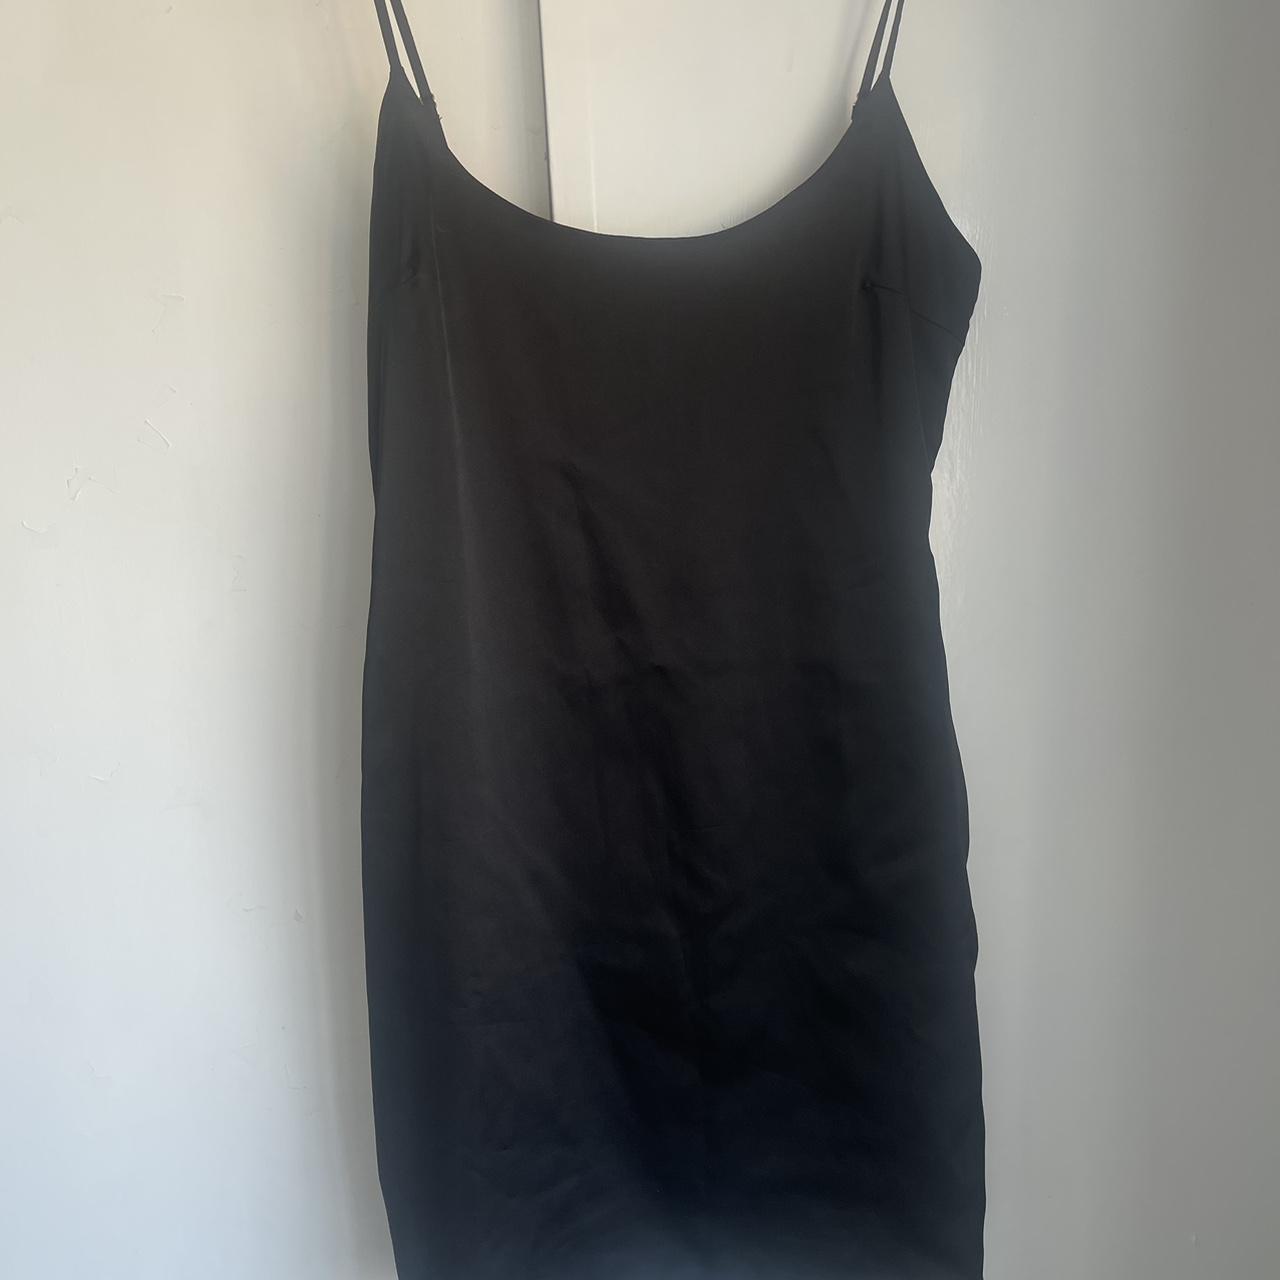 Oh Polly black mini bodycon dress Size 12, would... - Depop